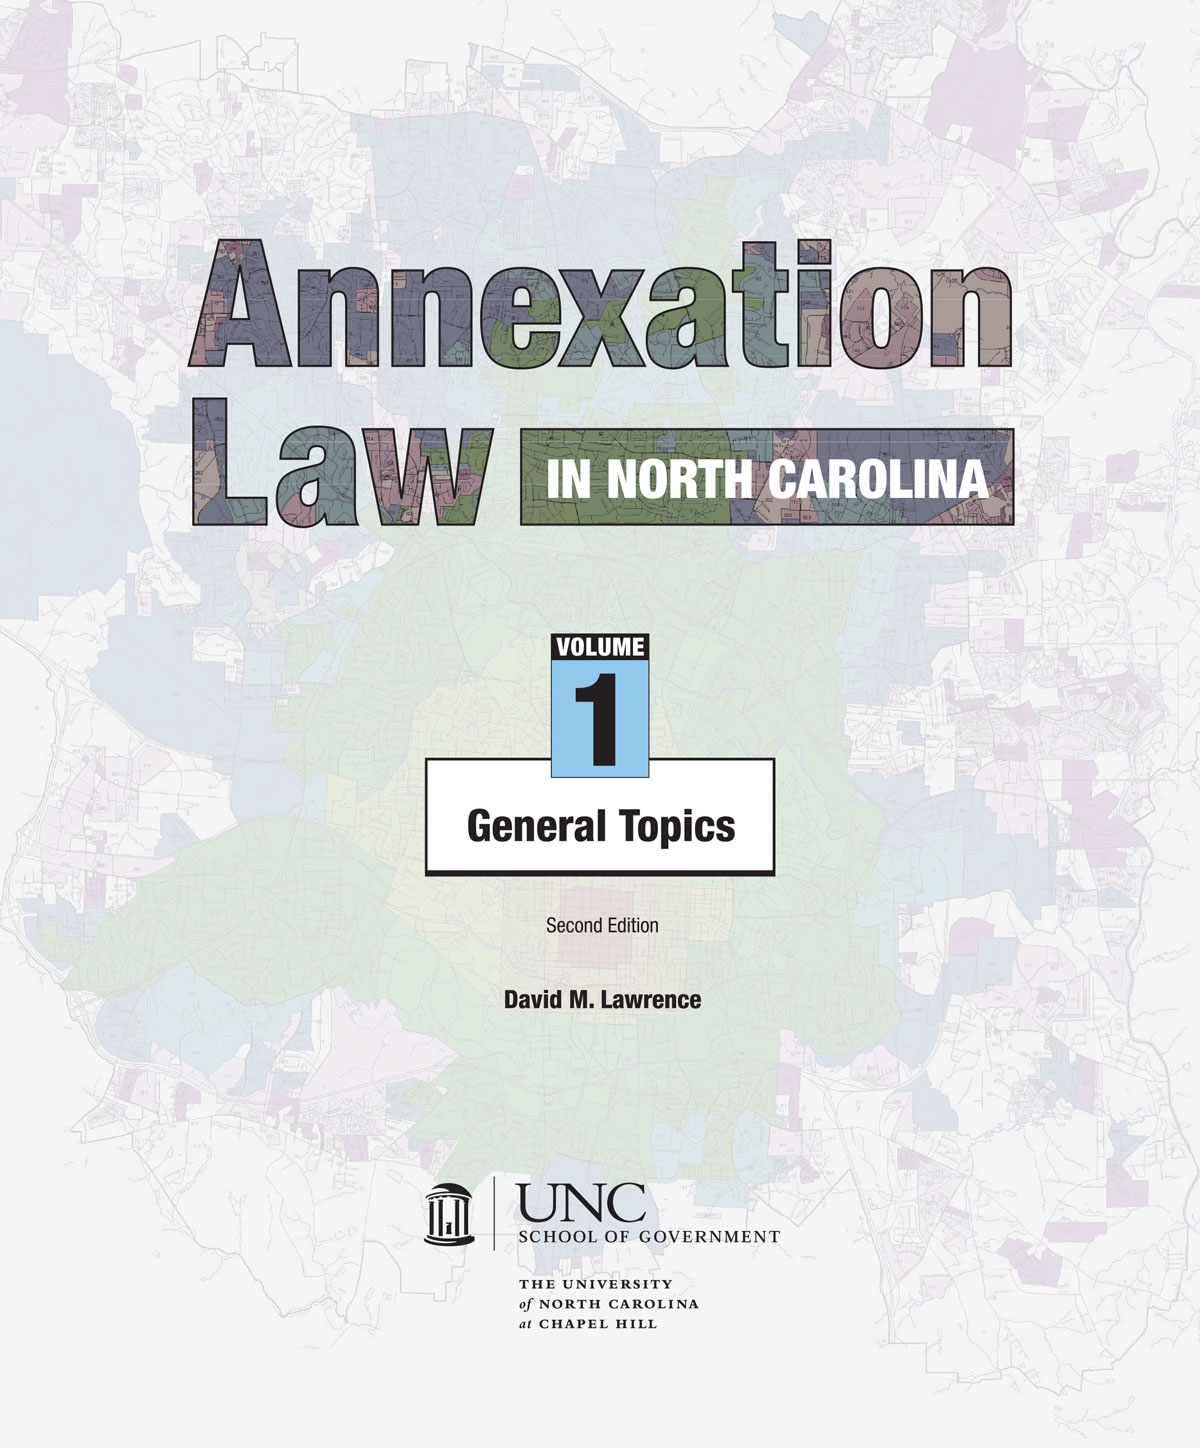 Cover image for Annexation Law in North Carolina: Volume 1 - General Topics, Second Edition